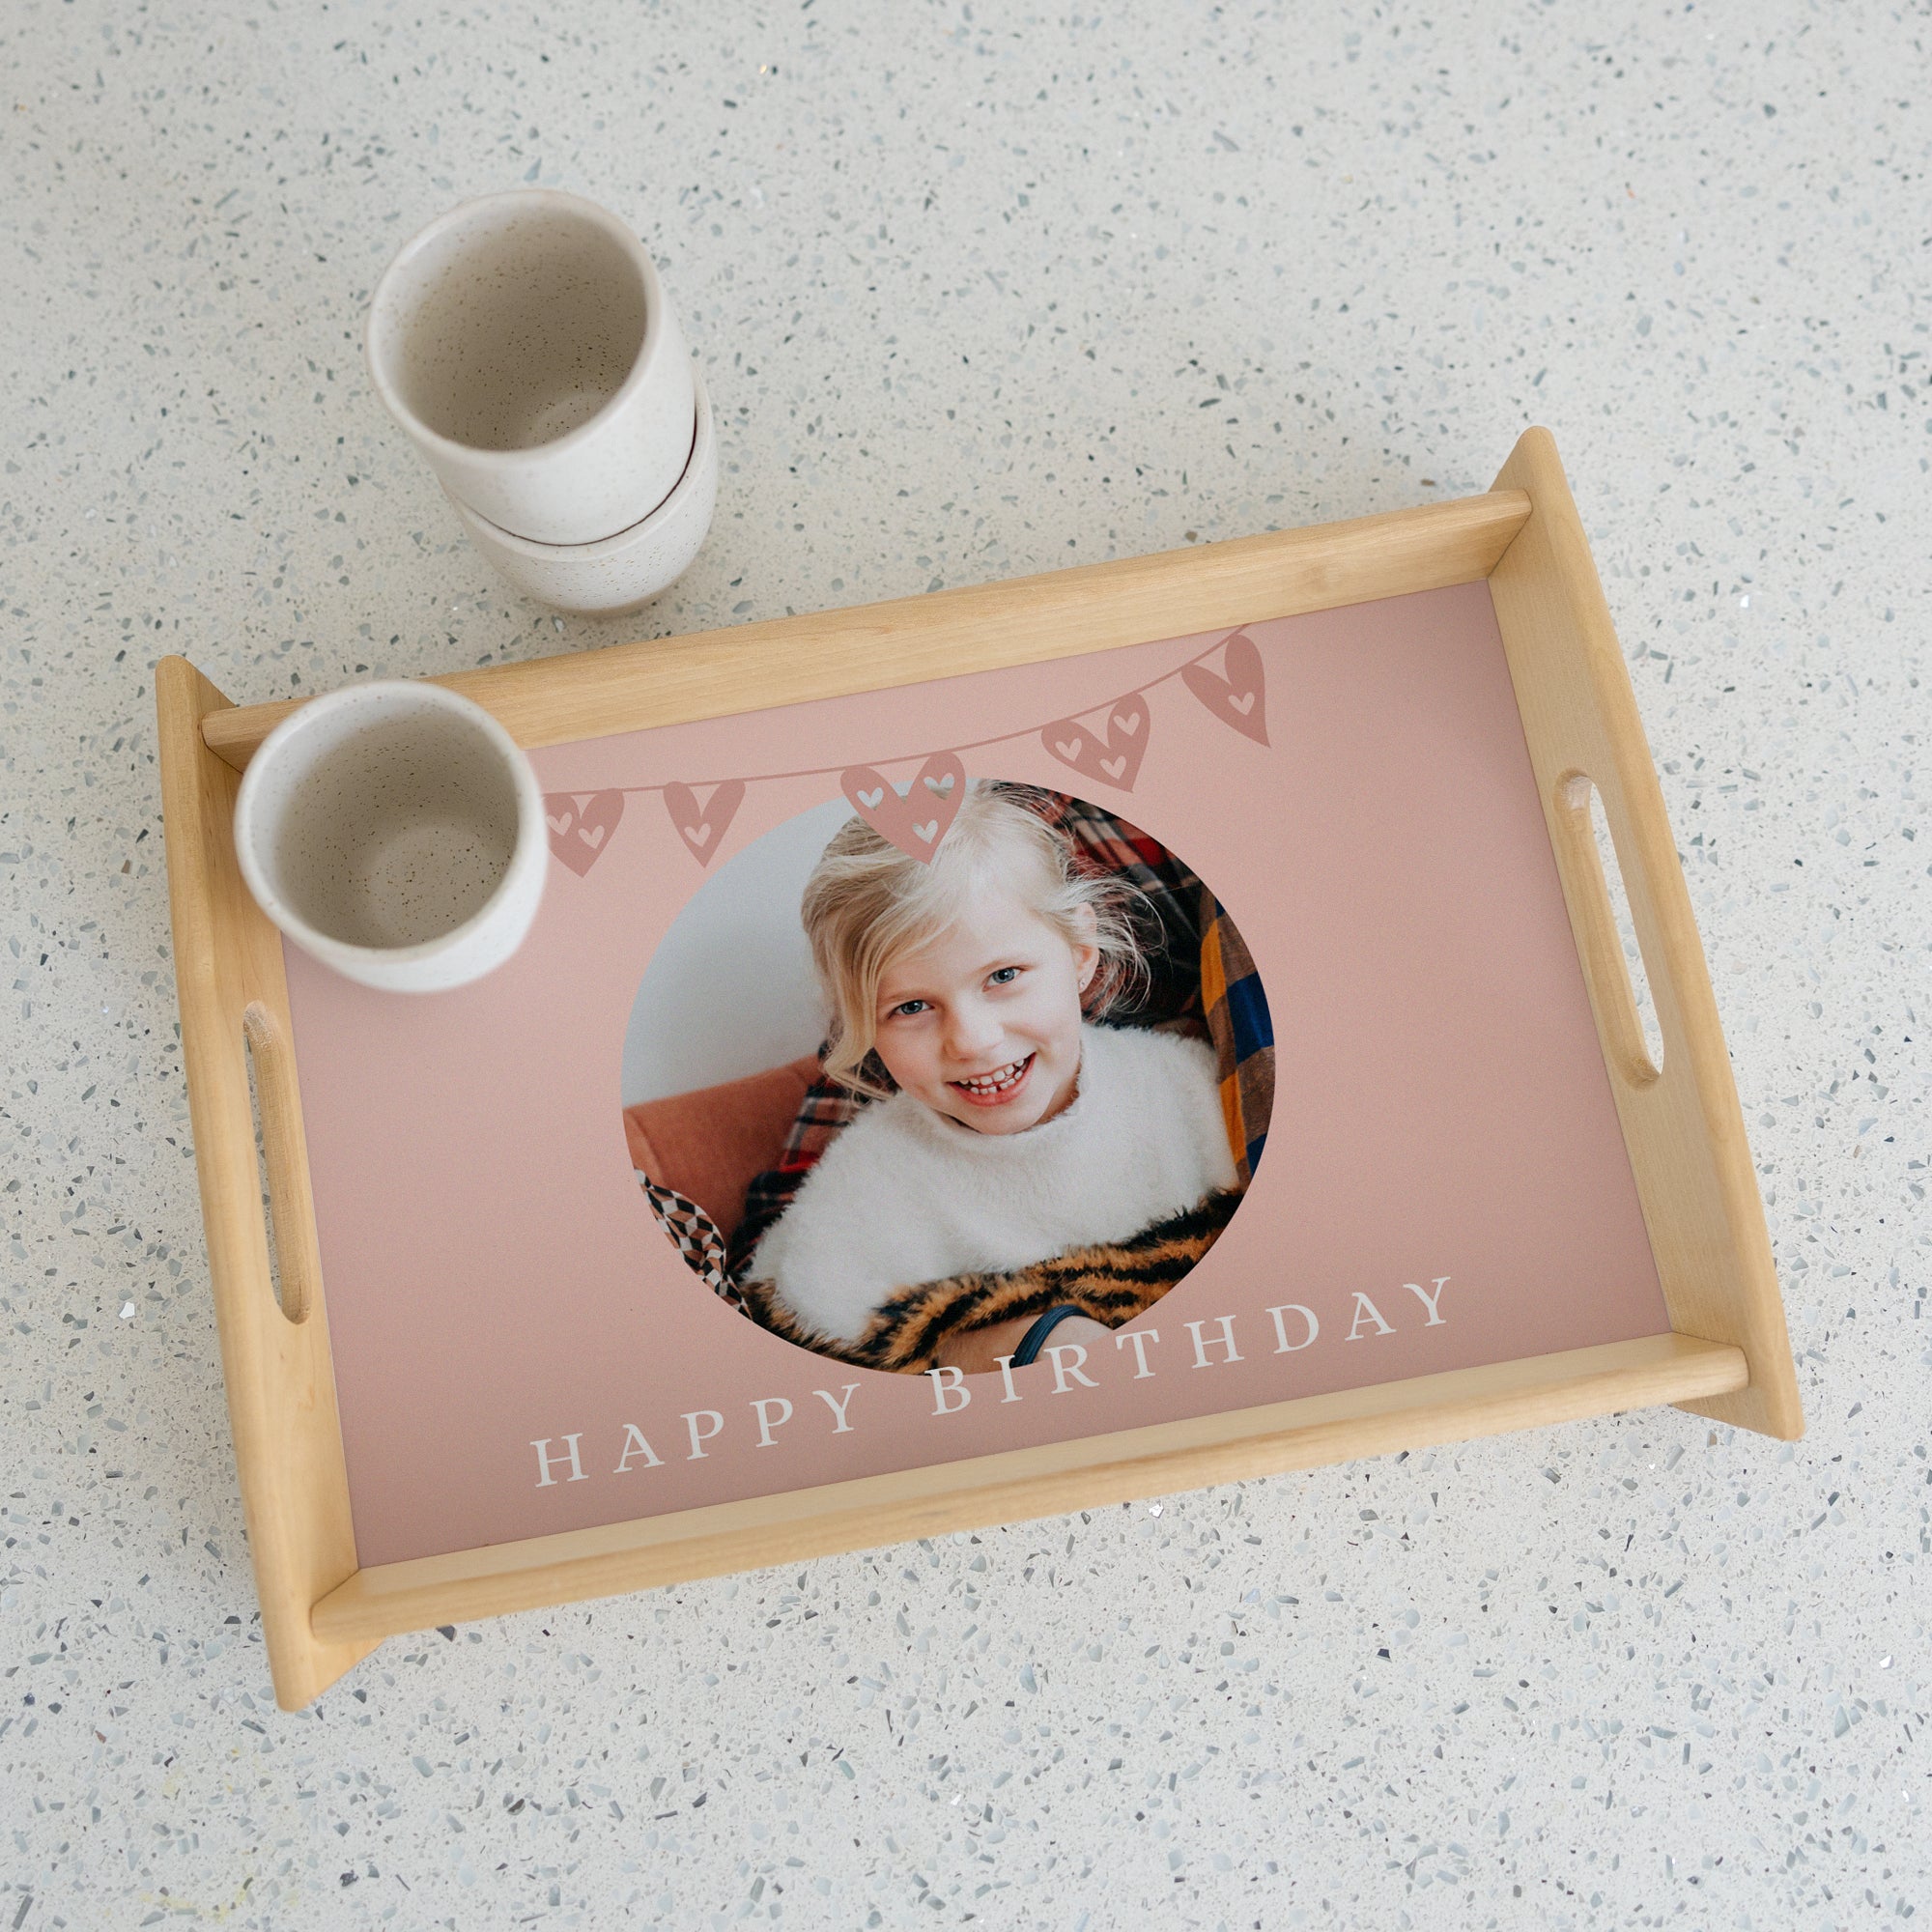 Personalised wooden serving tray - Beige